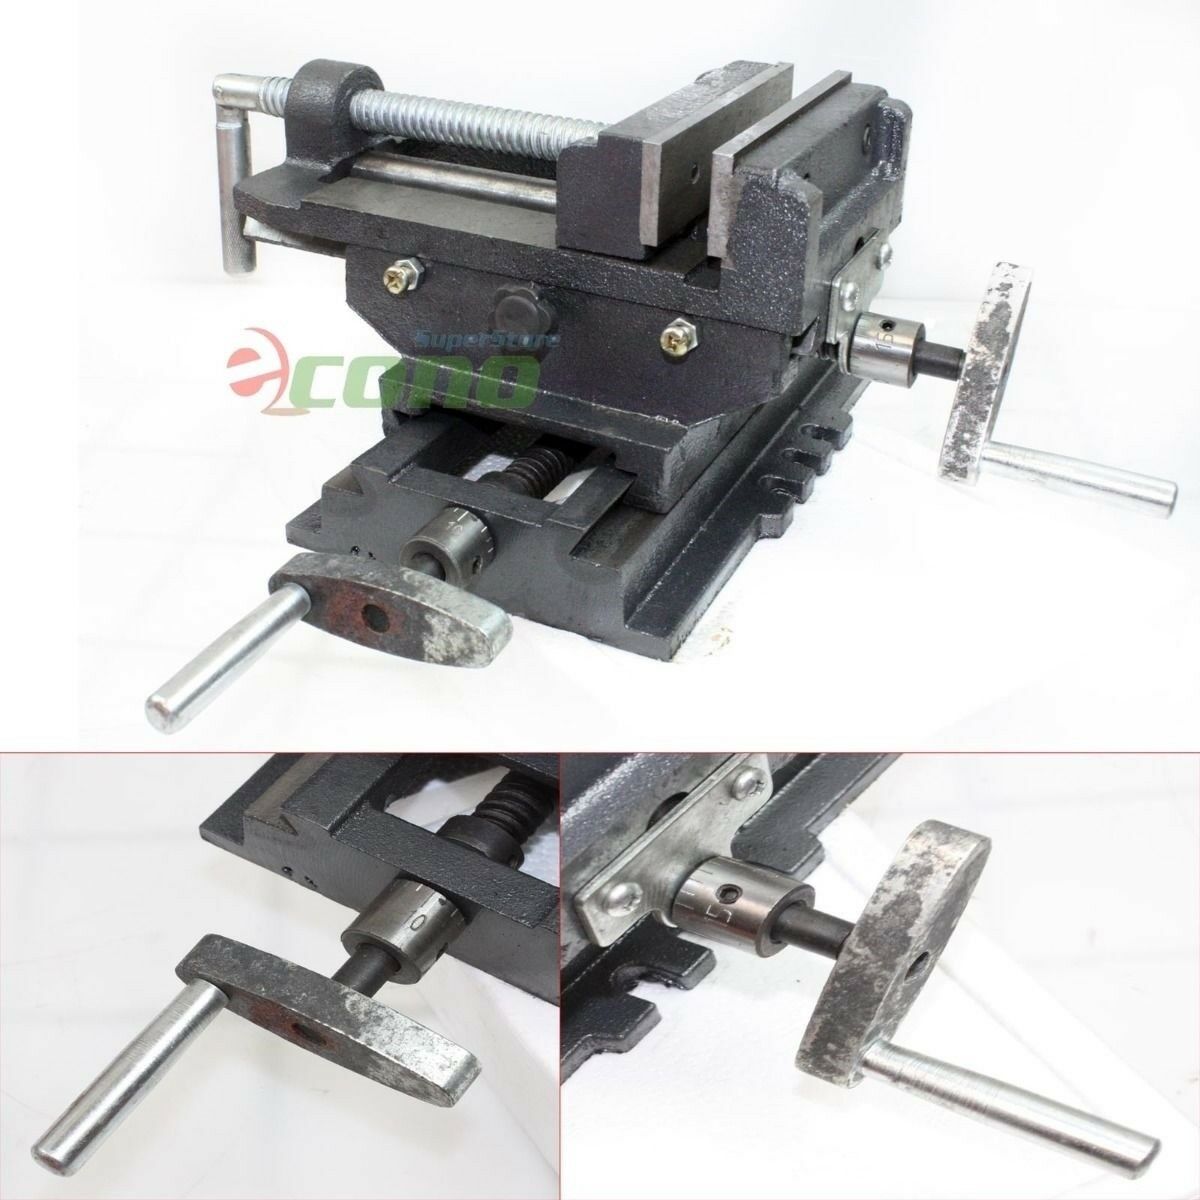 Details about   5" 2 Way Clamp Cross Drill Press Vise Slide Metal Milling  Machine Heavy Duty 